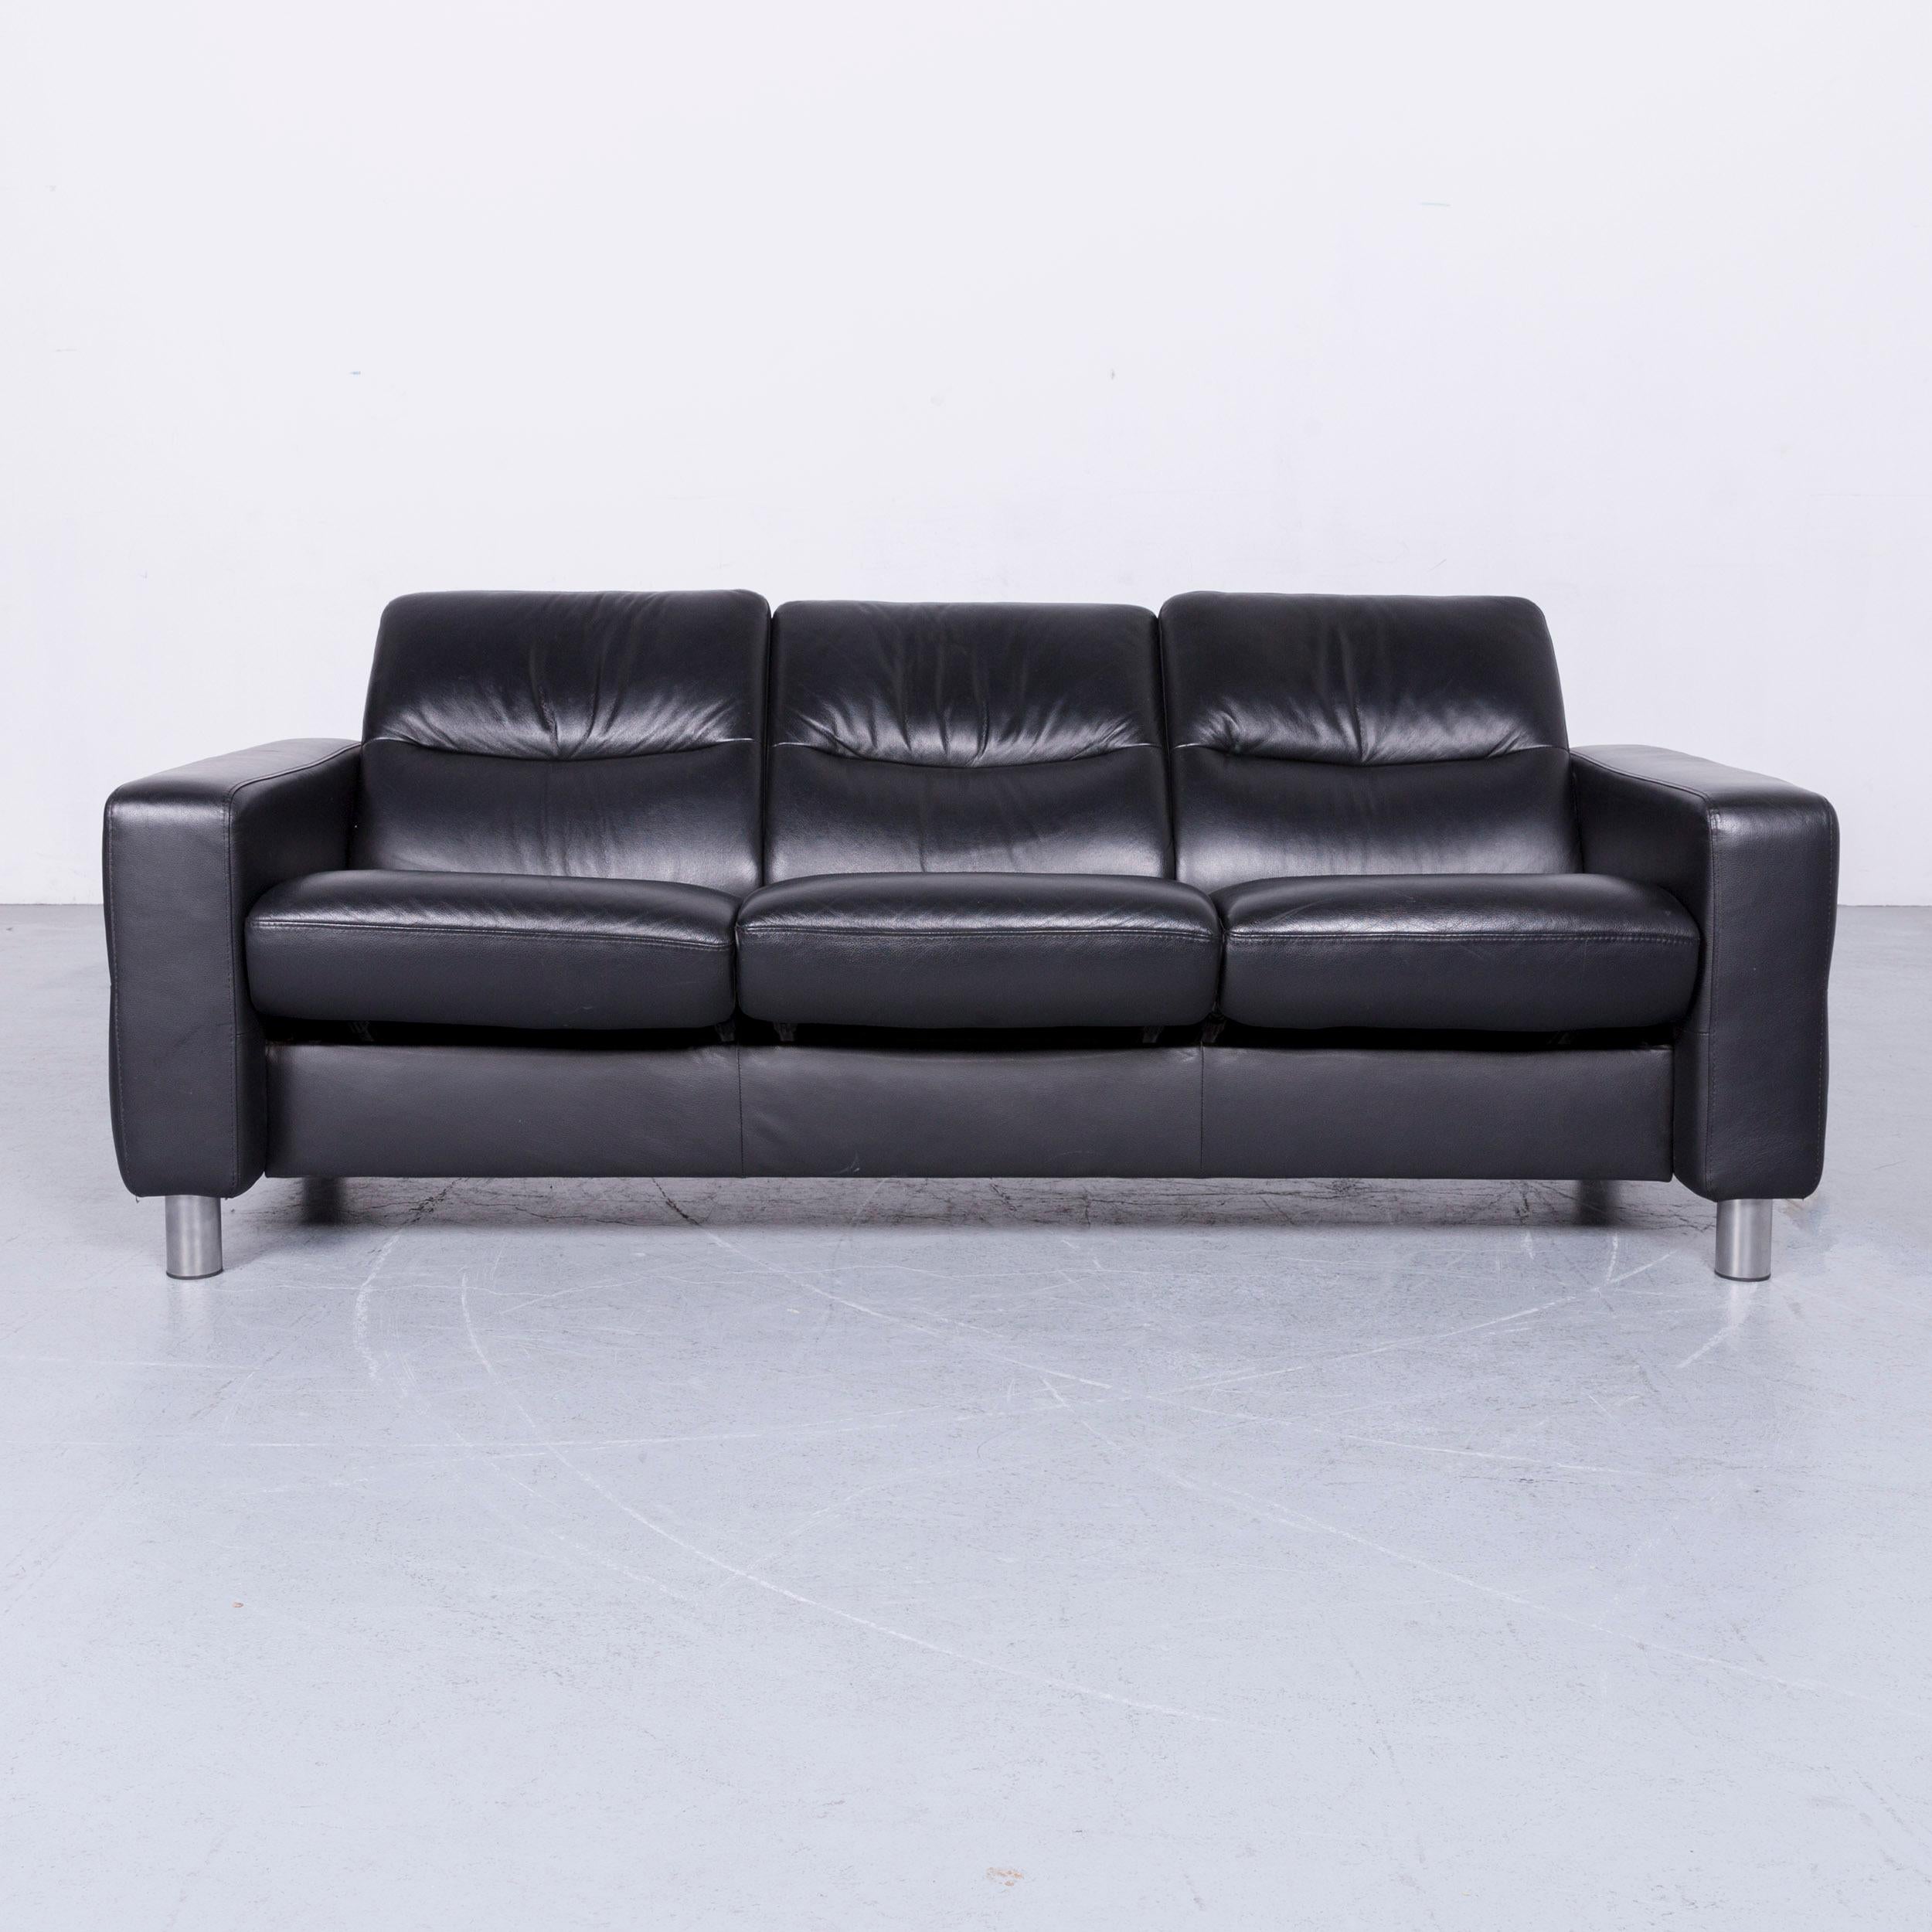 We bring to you an Ekornes Stressless relax sofa black leather TV recliner three-seat.